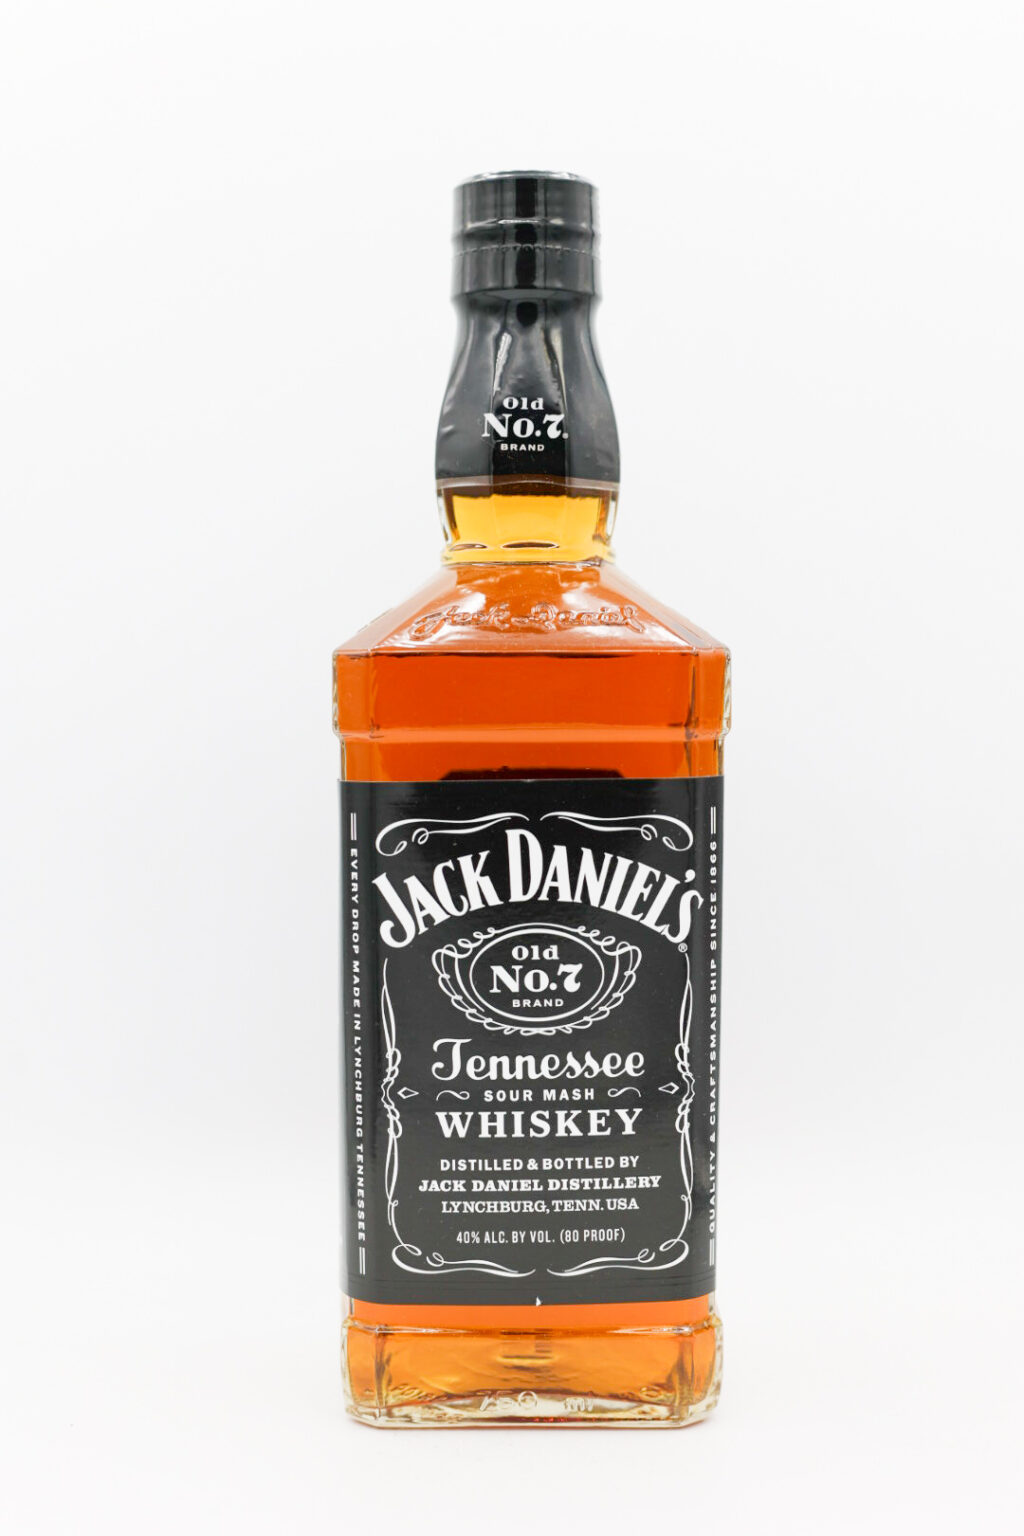 Jack Daniel’s Old No. 7 Tennessee Whiskey 750ml